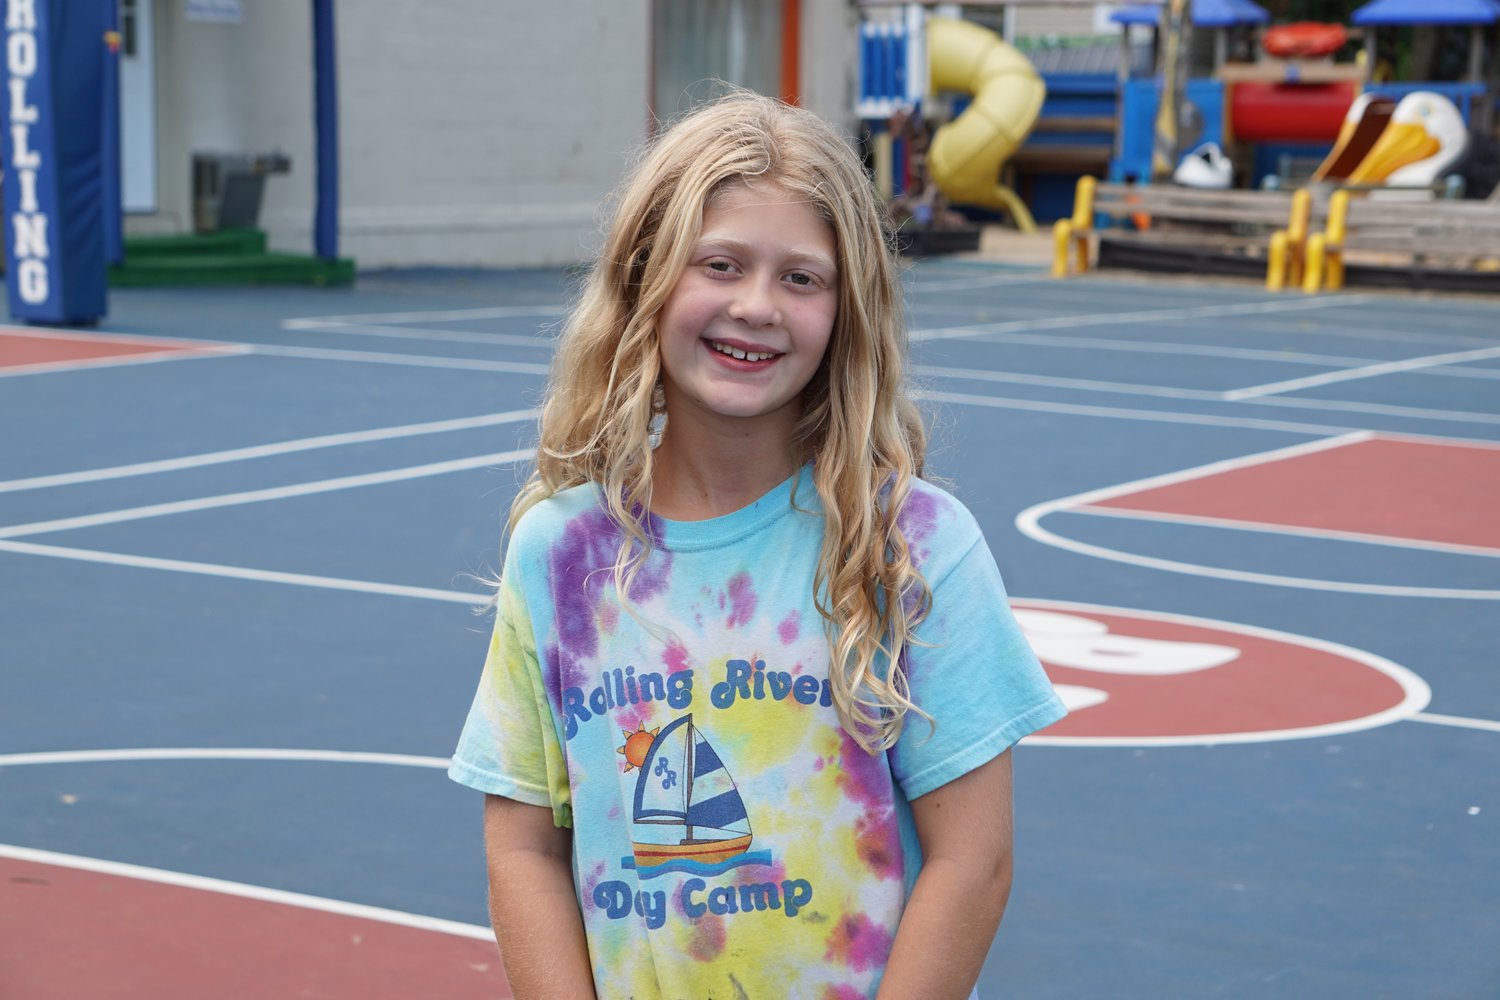 Michela Zuckerman, 8, enjoyed making bracelets as her favorite activity to do at camp.